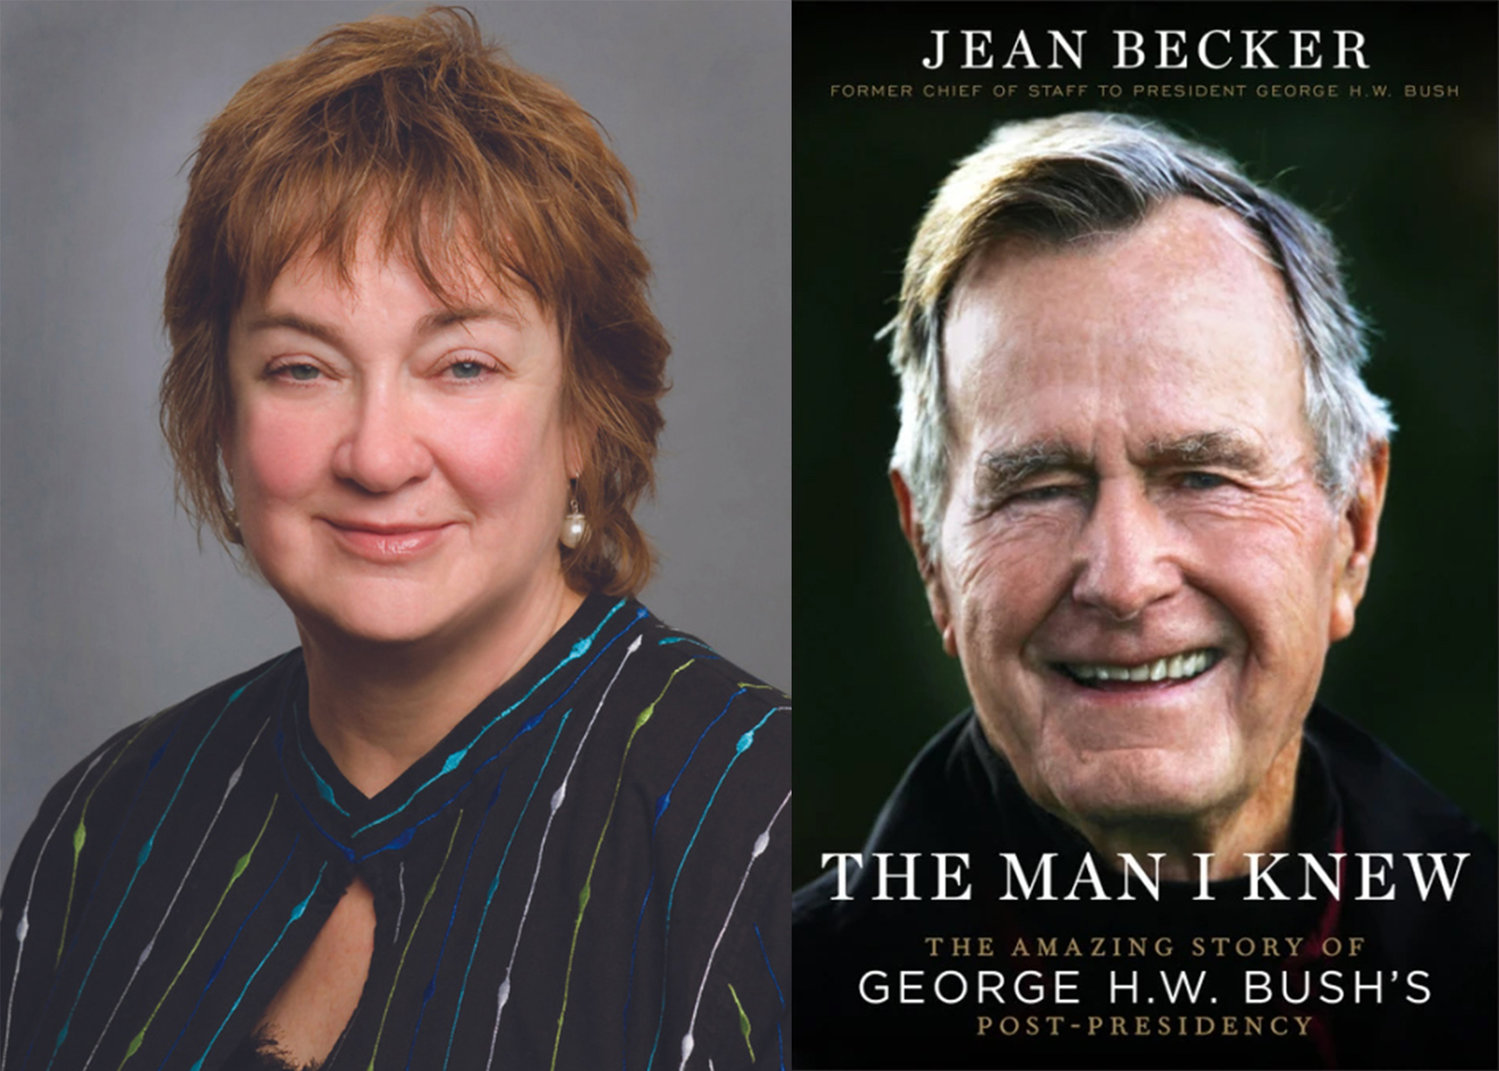 Jean Becker, who served as former President George H.W. Bush’s chief of staff for almost 25 years, grew up in Martinsburg.